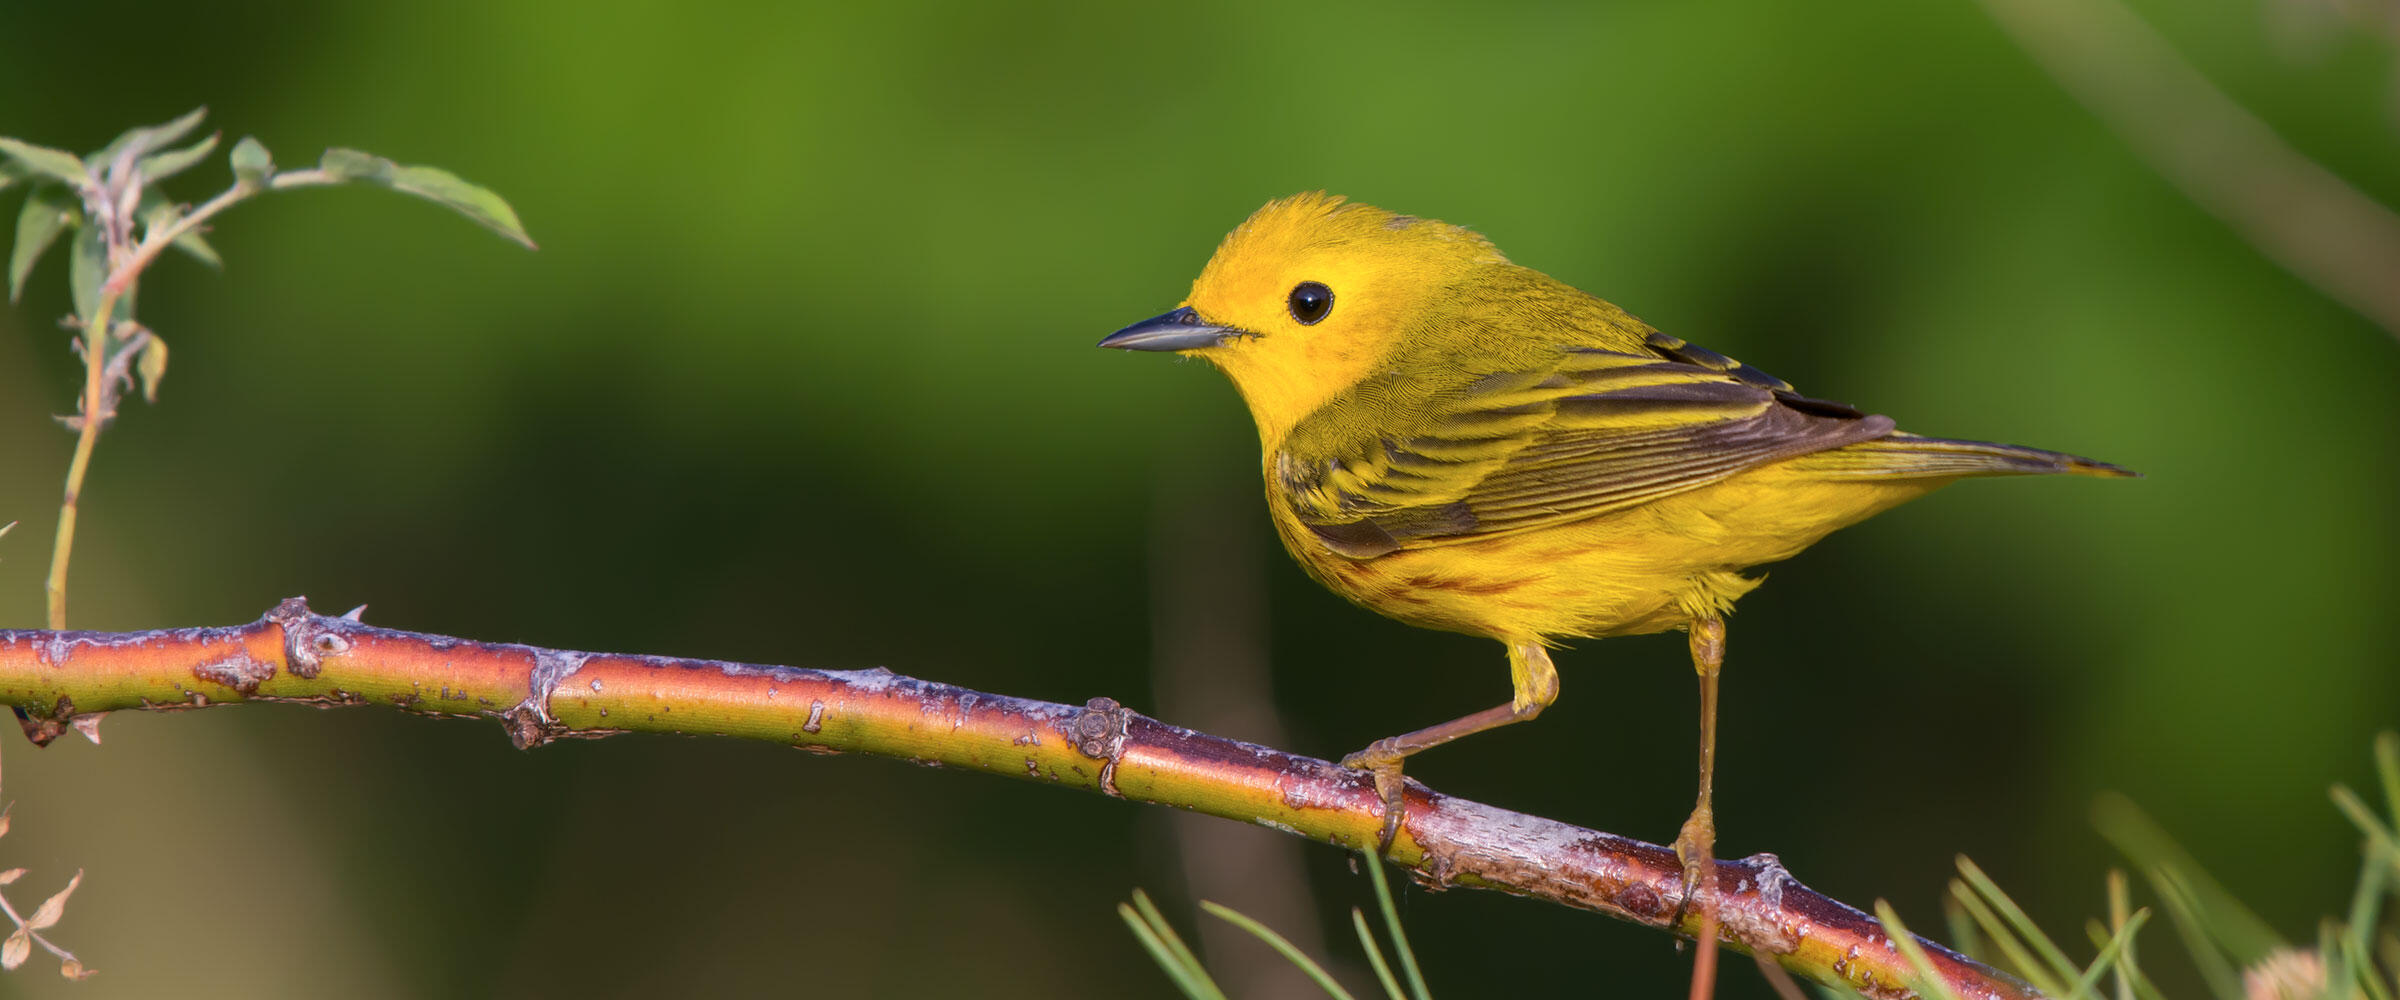 Yellow Warbler perched on a branch.